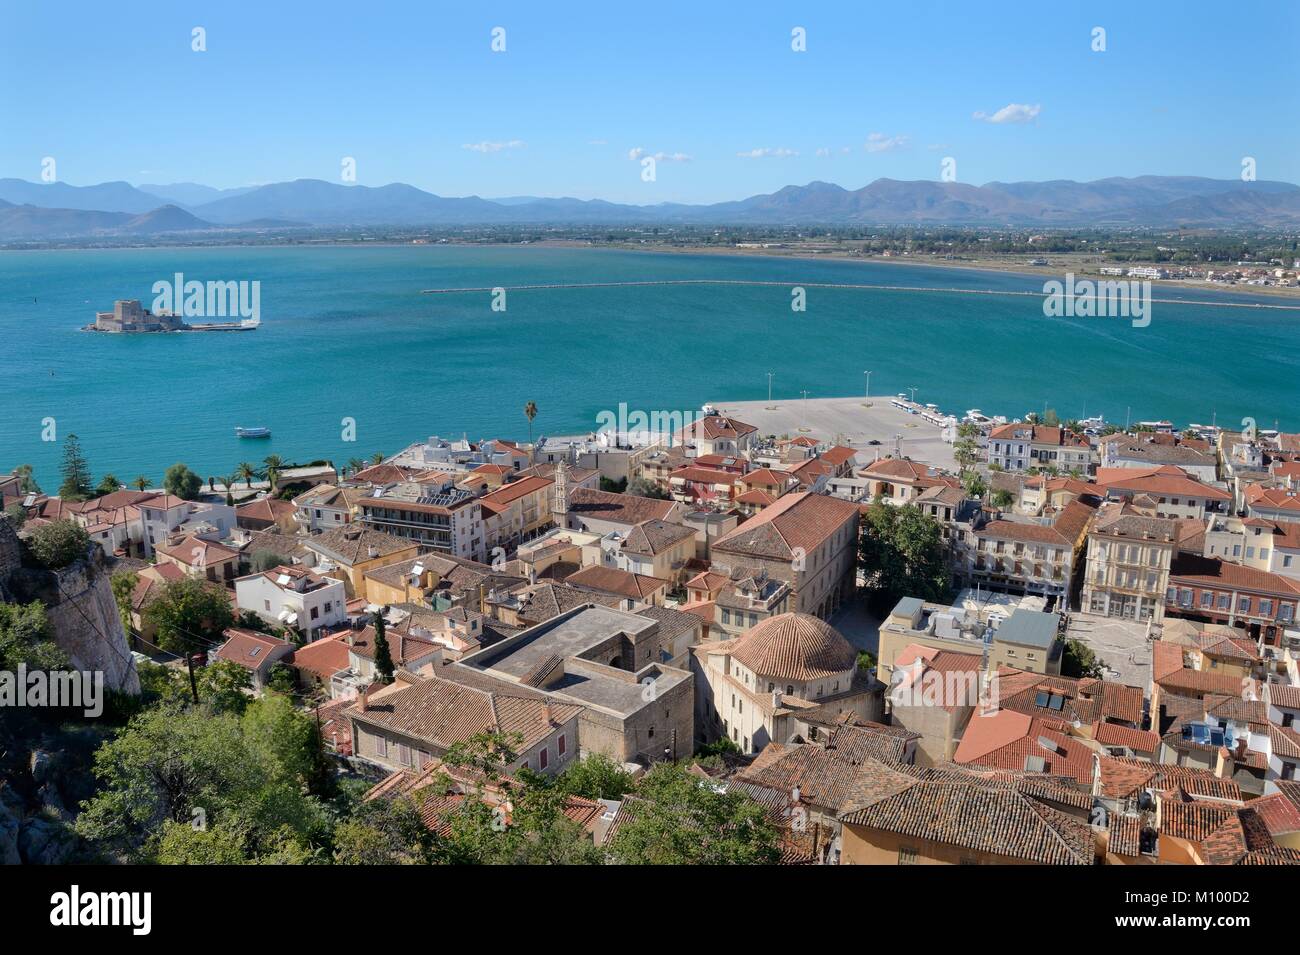 Overview of Nafplio old town and the Bay of Nafplio in the Argolic Gulf, Argolis, Peloponnese, Greece, July. Stock Photo